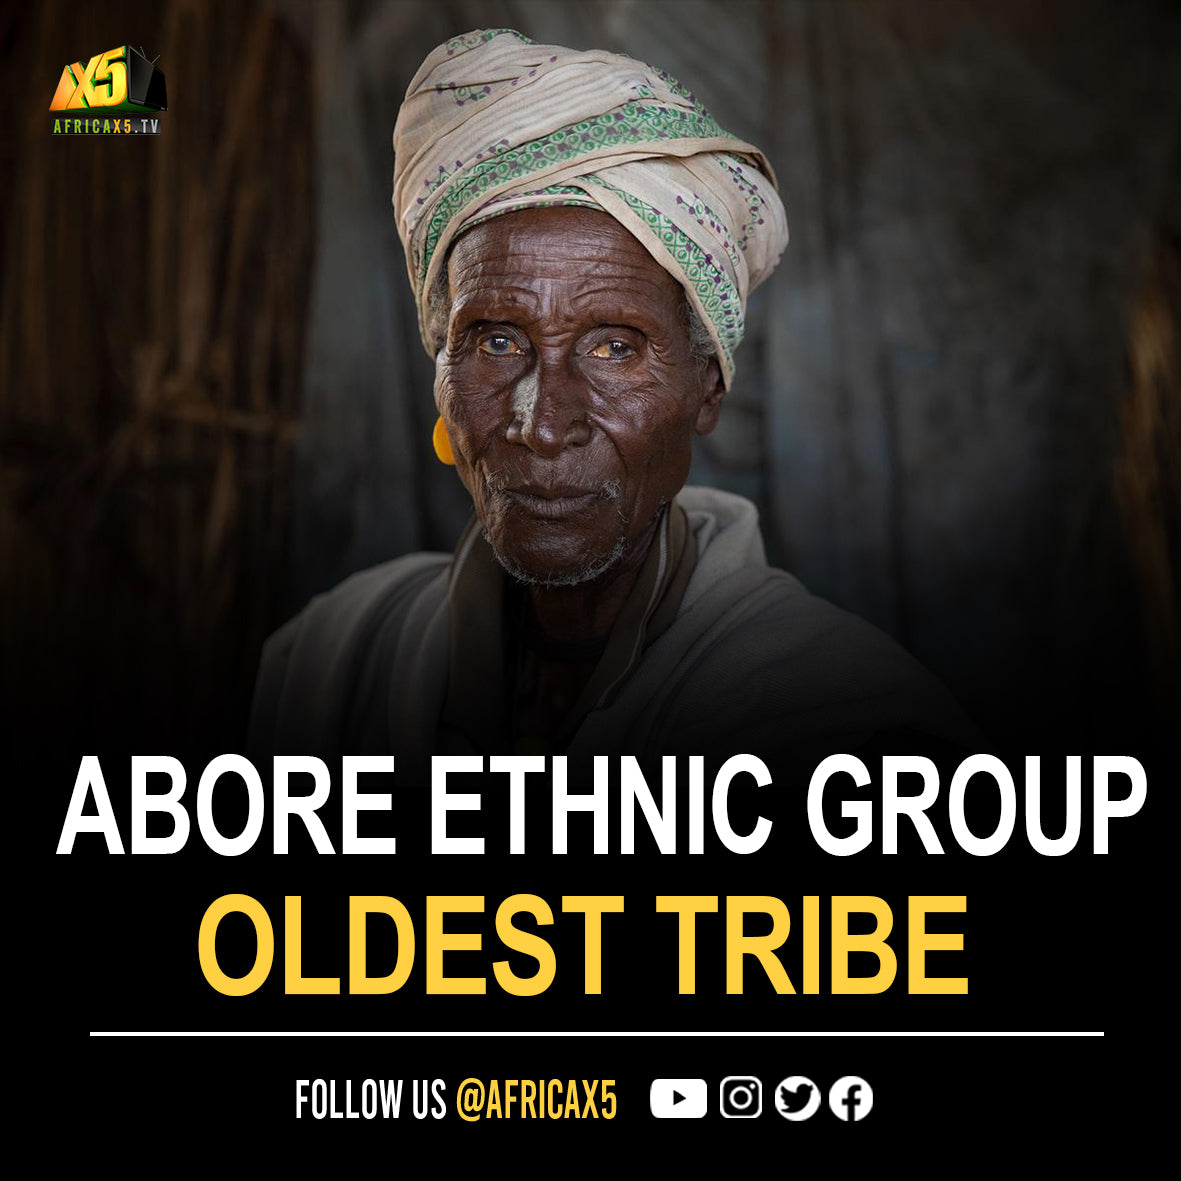 Arbore ethnic group, one of oldest tribes in the world